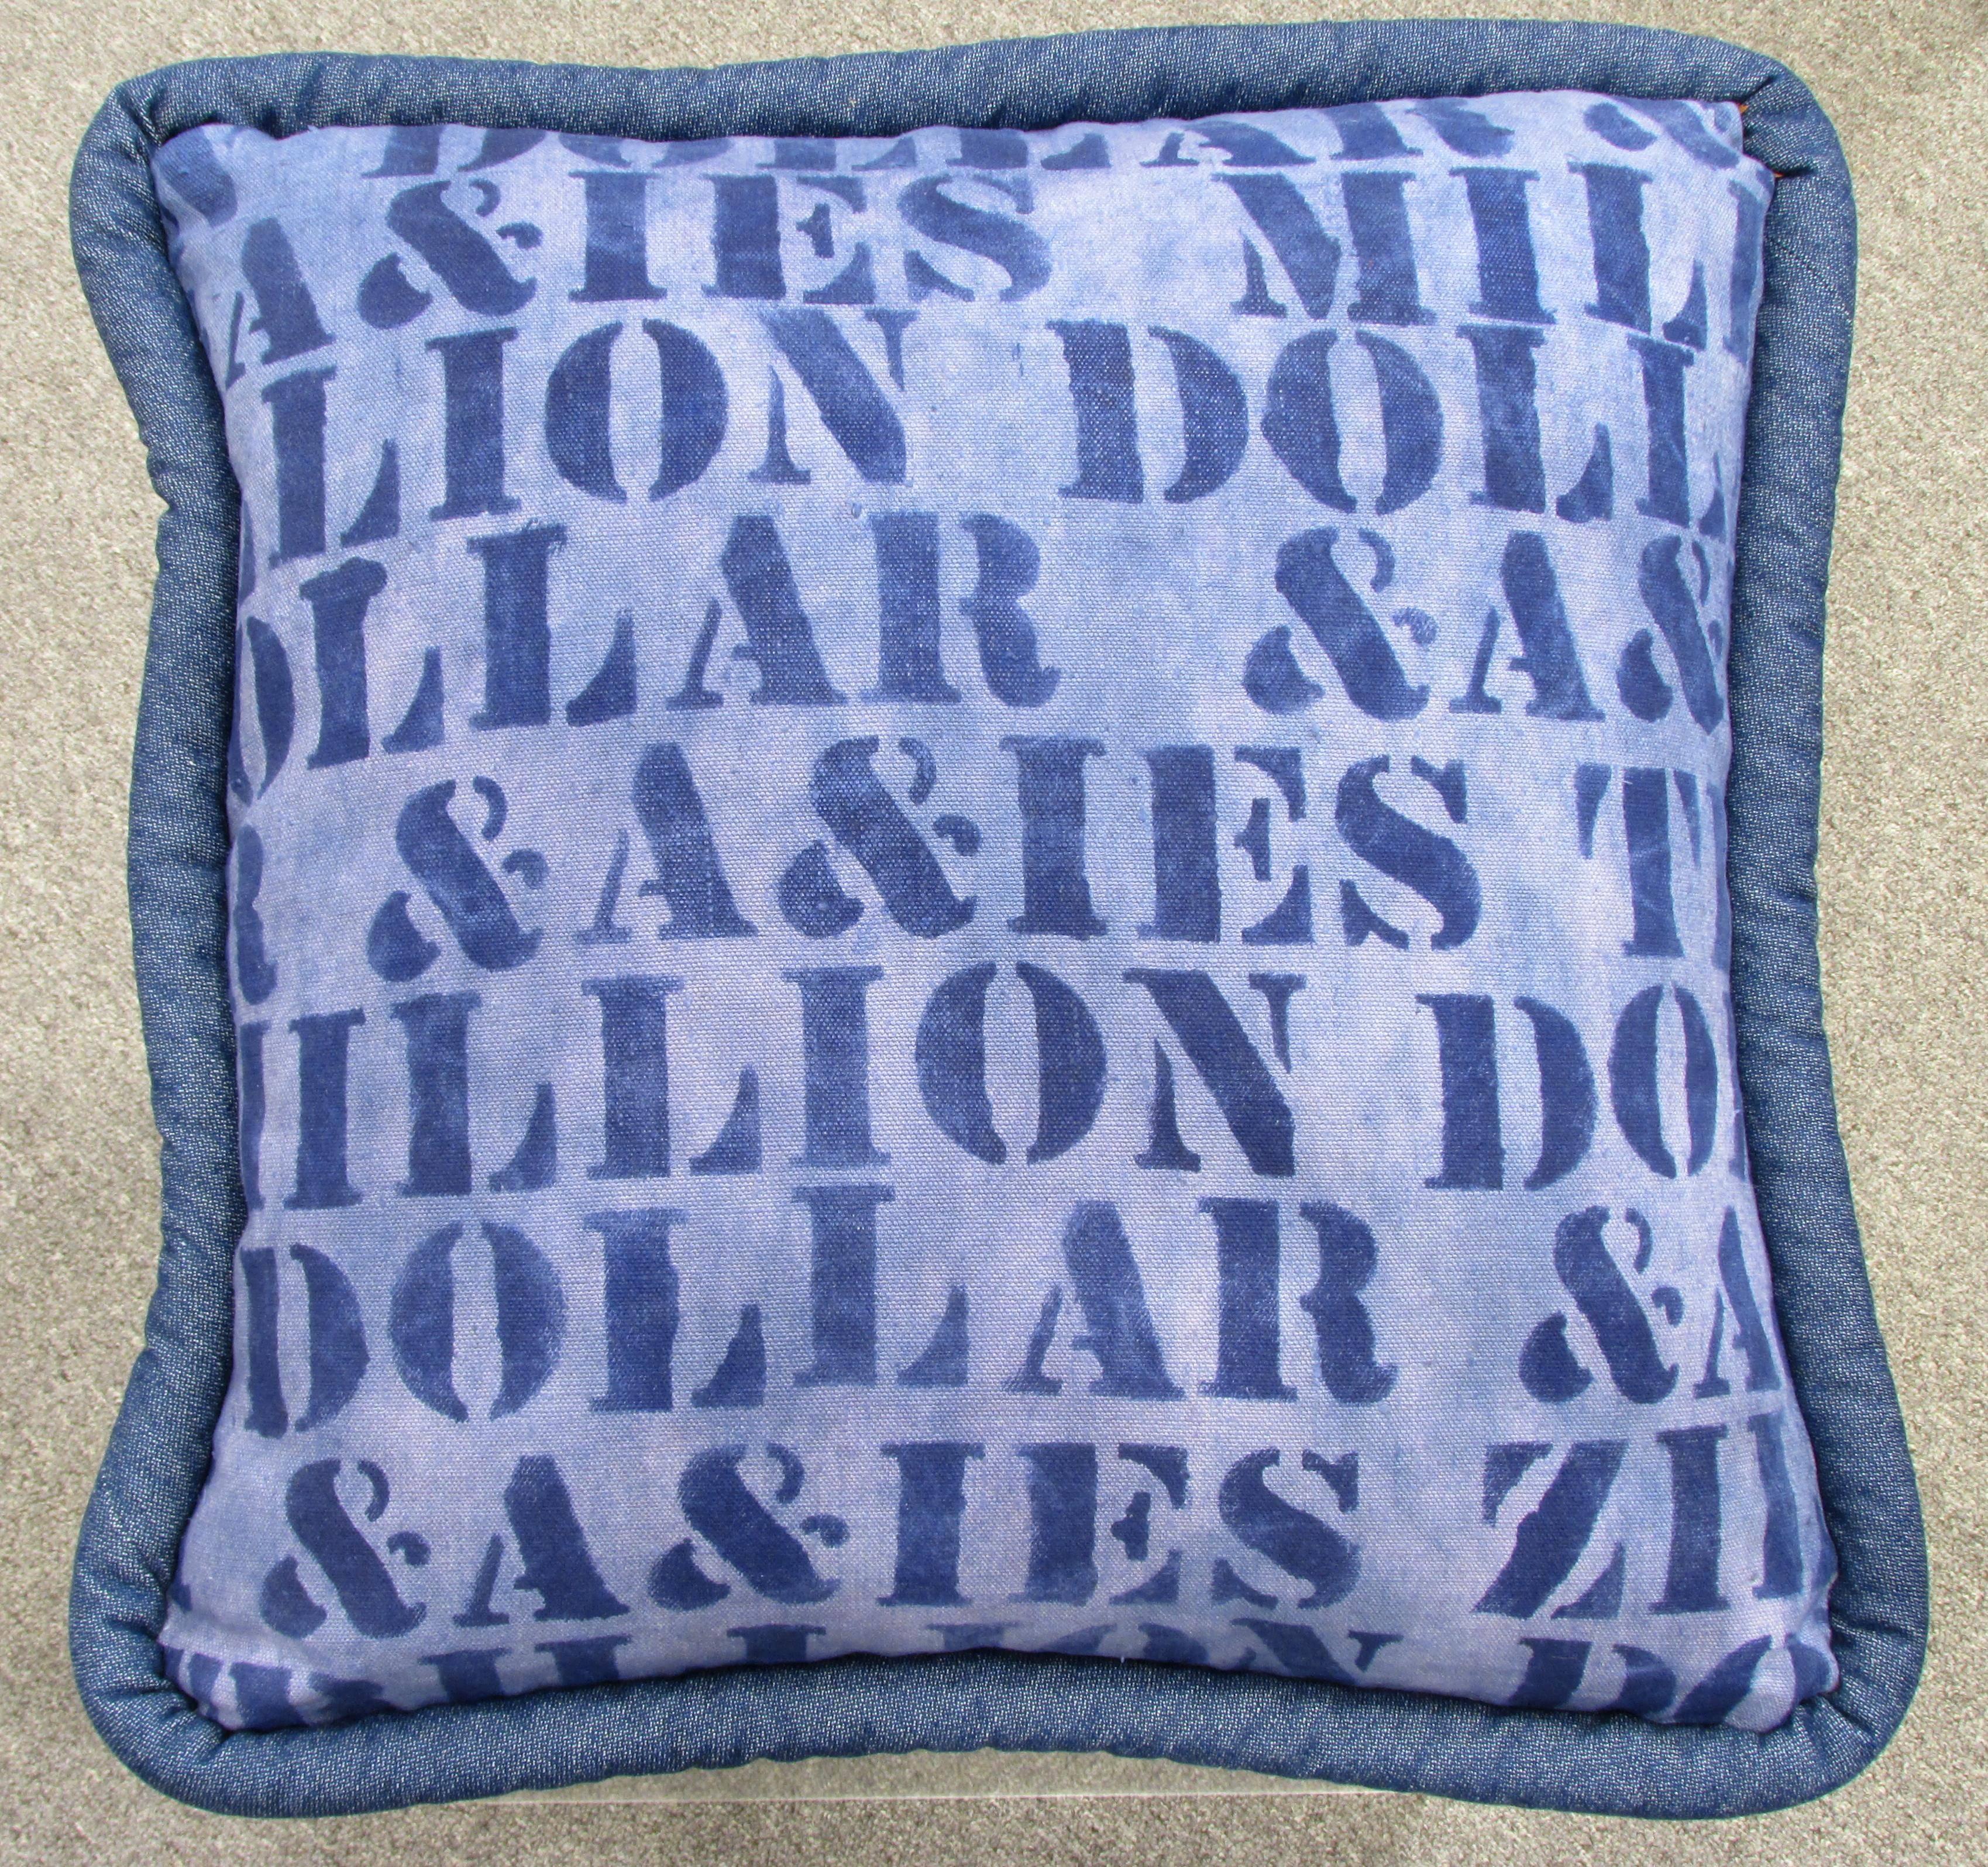 Million Dollar Babies Pillow In Excellent Condition For Sale In High Point, NC